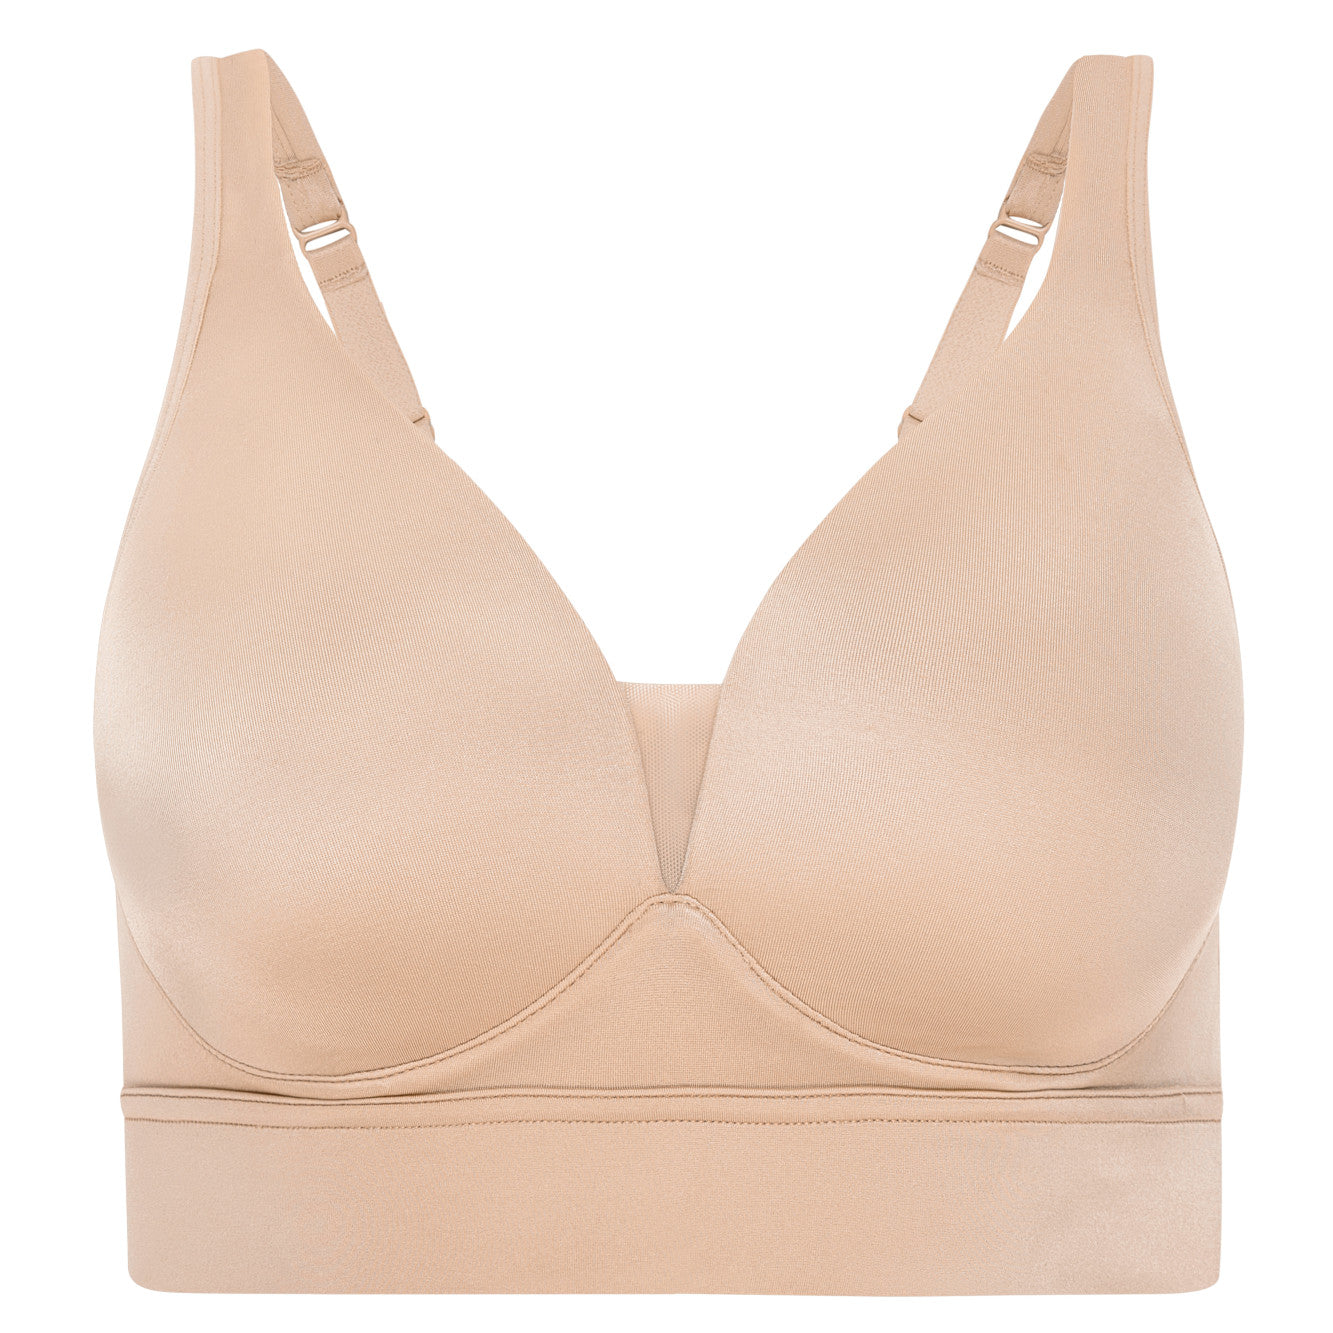 Buy Jockey Forever Fit Full Coverage Molded Cup Bra, Cream Tan